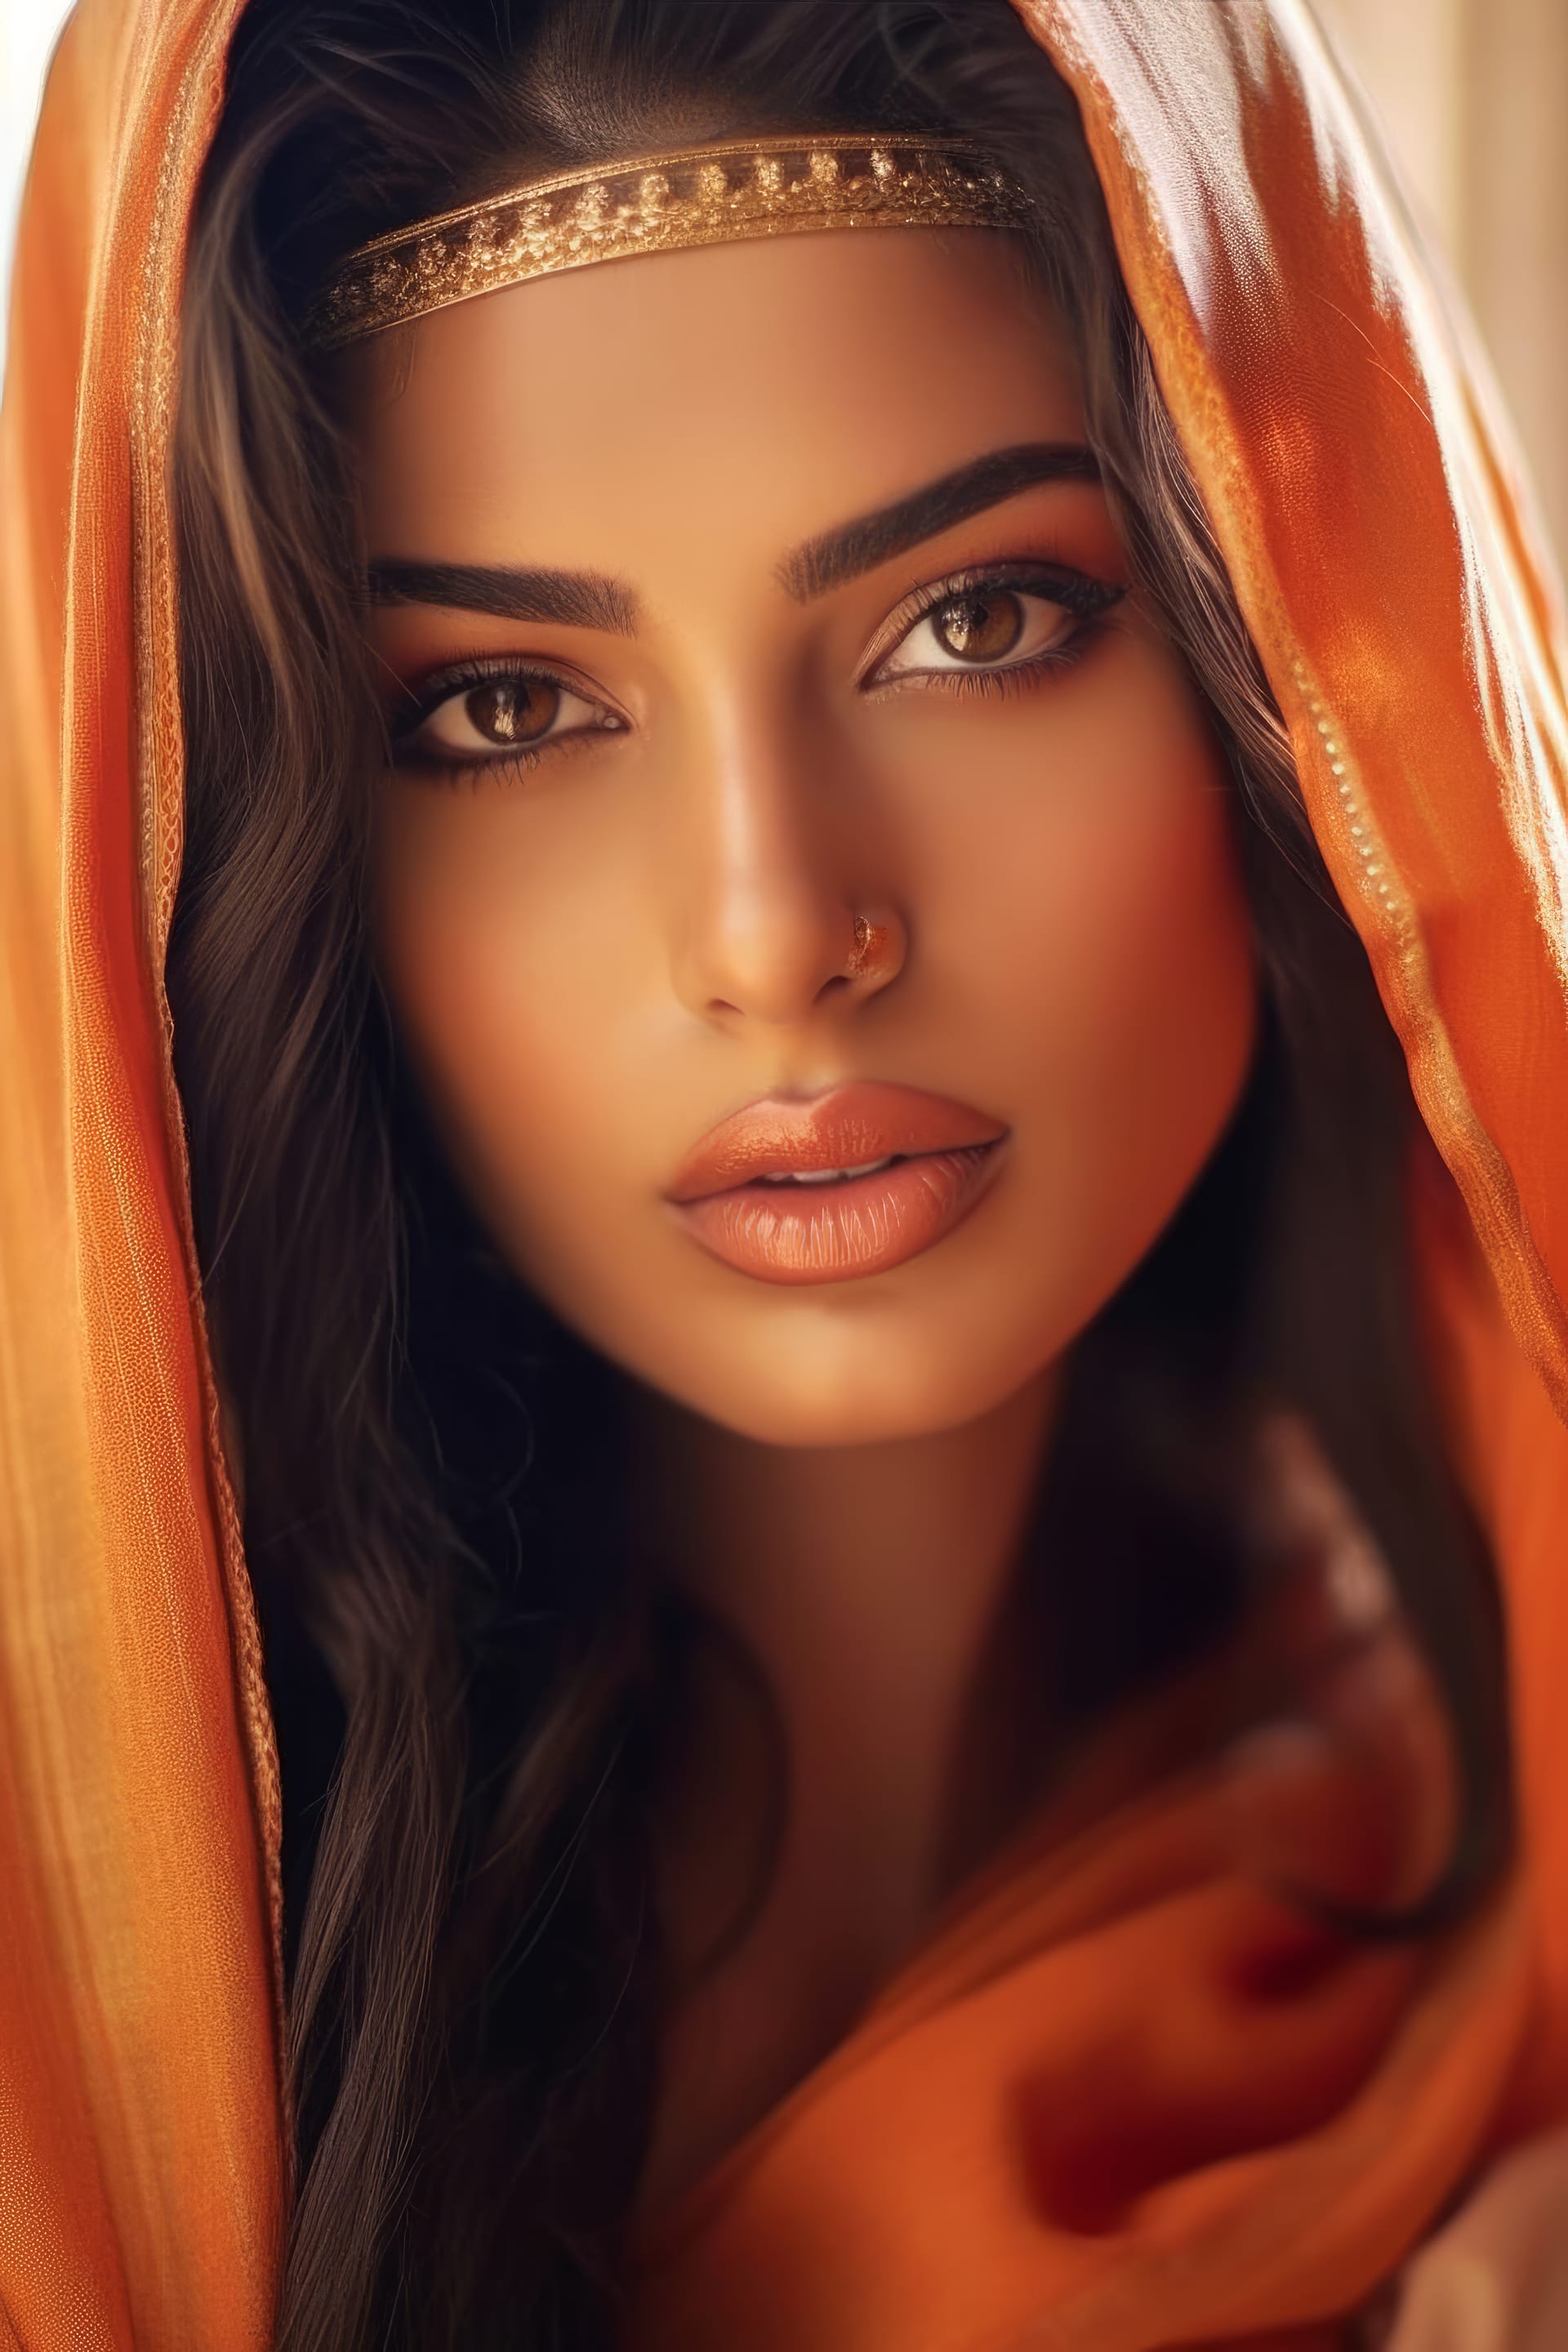 Beautiful woman with nose ring balanced image best instagram profile picture